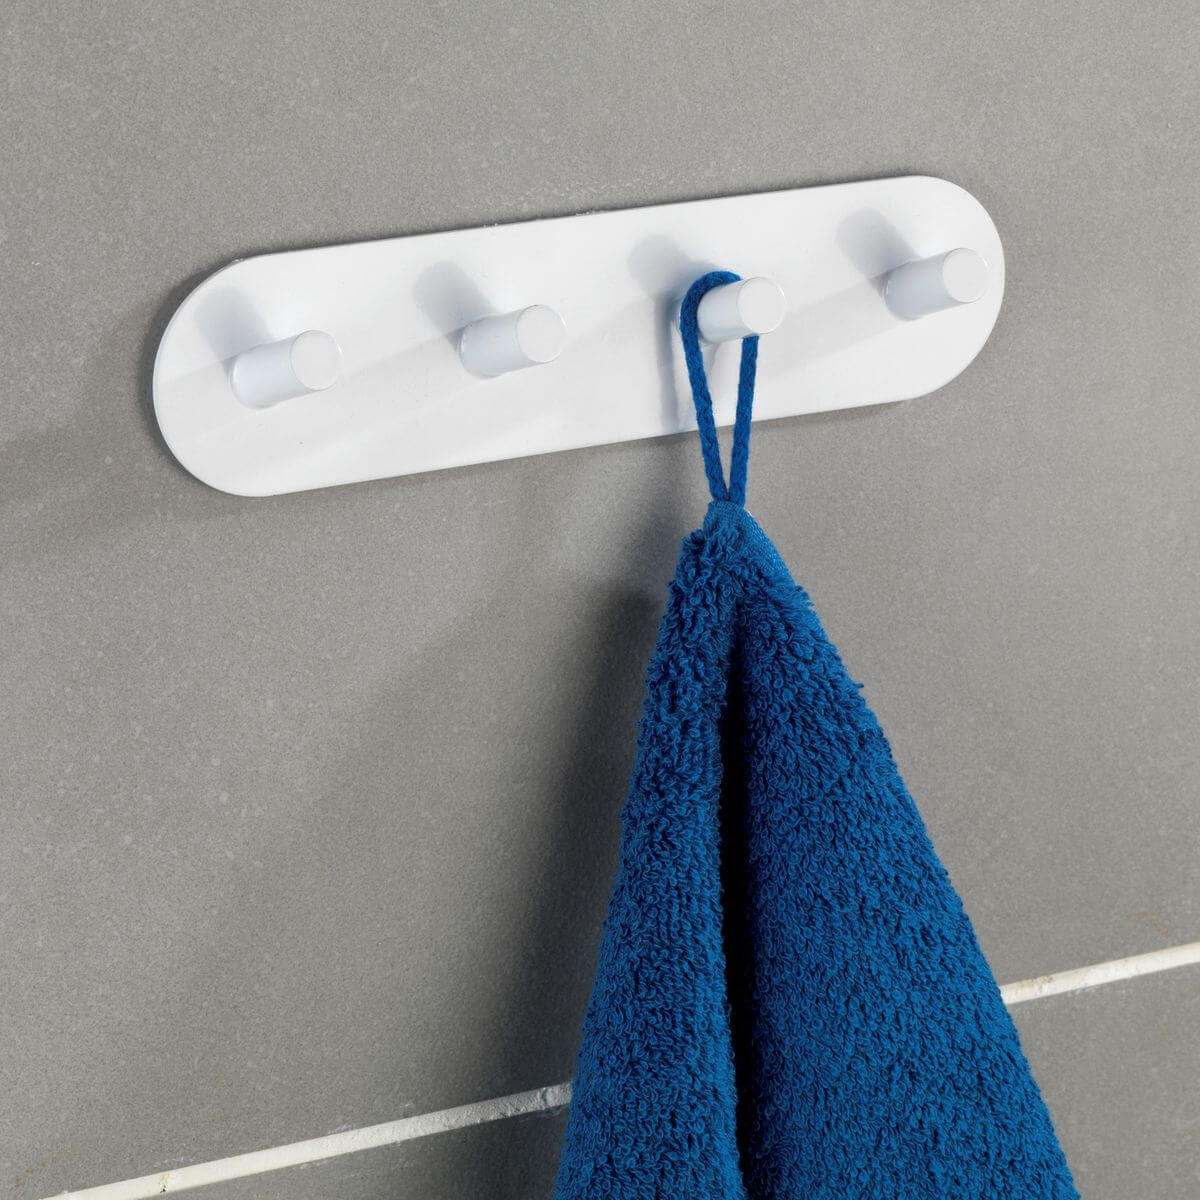 A white Turbo Lock adhesive suction hook strip installed on a tiled bathroom wall